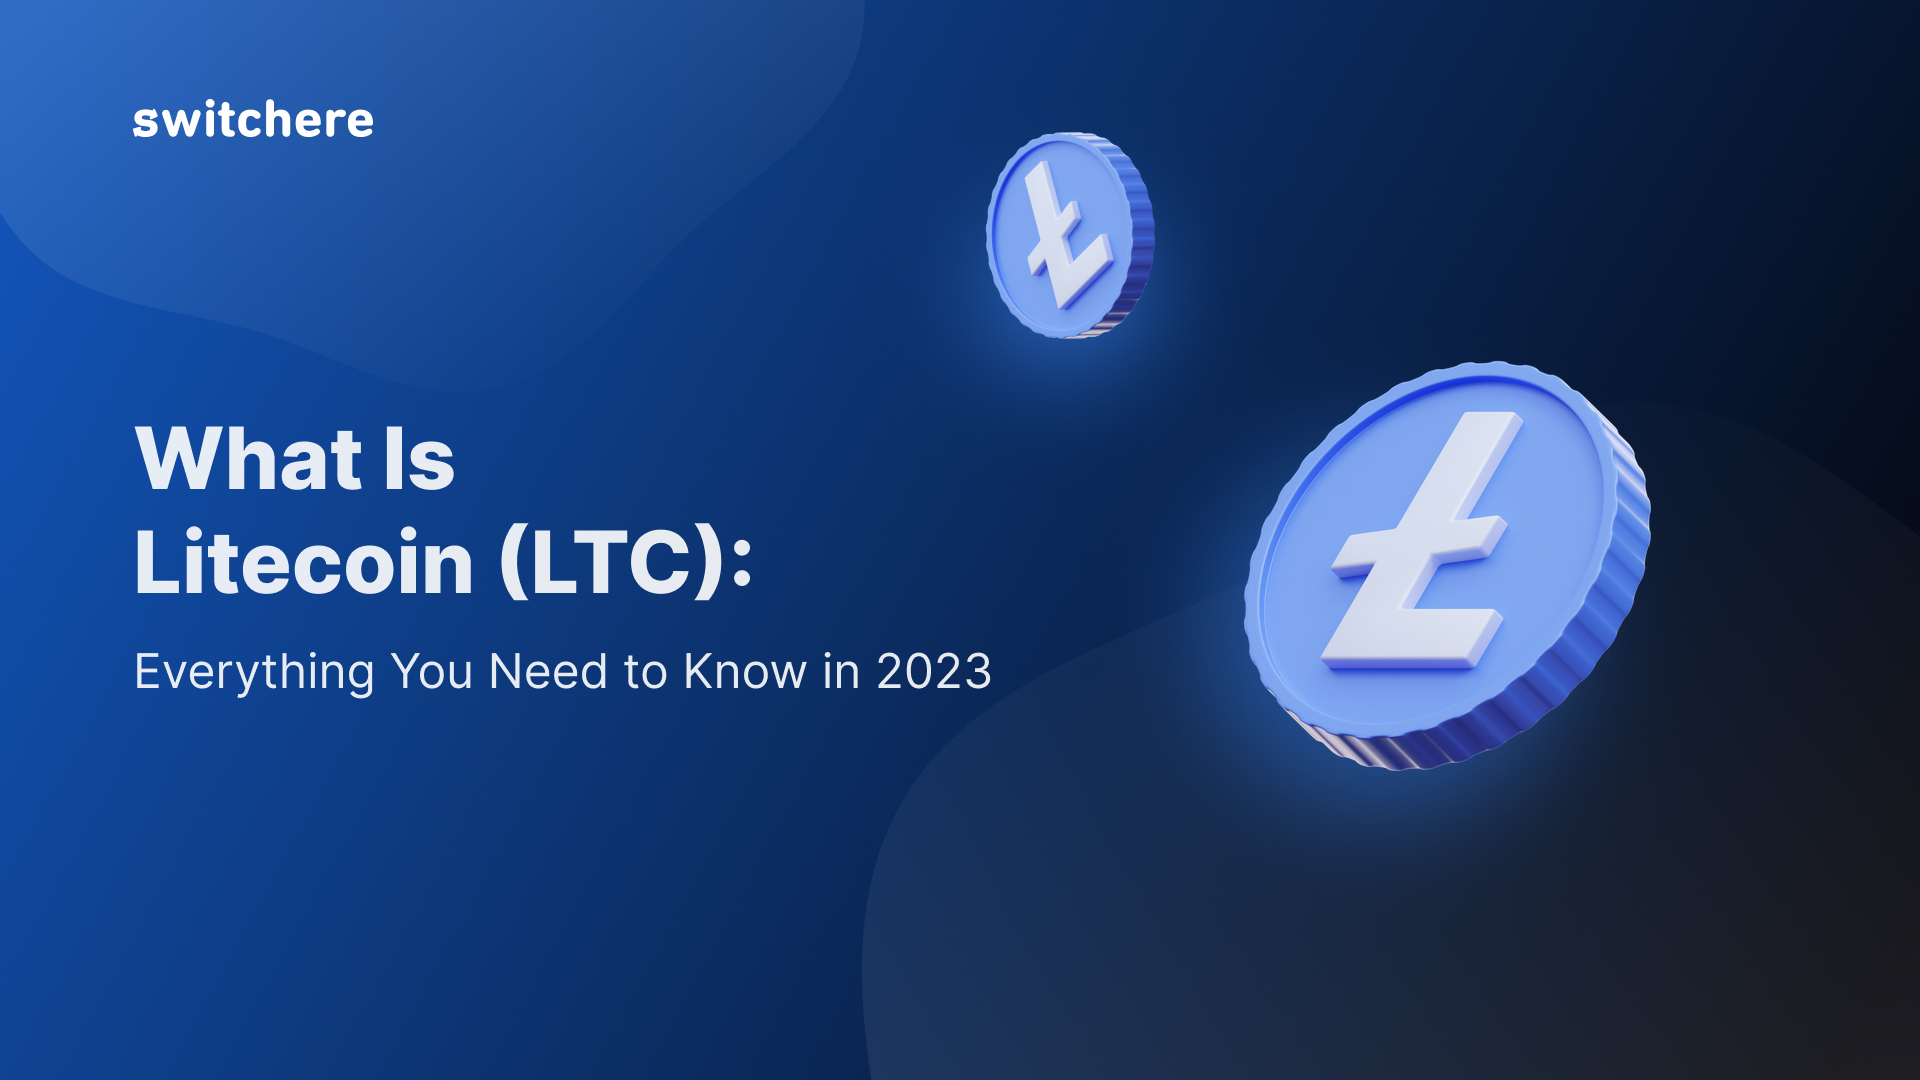 What Is Litecoin (LTC): Everything You Need to Know in 2023